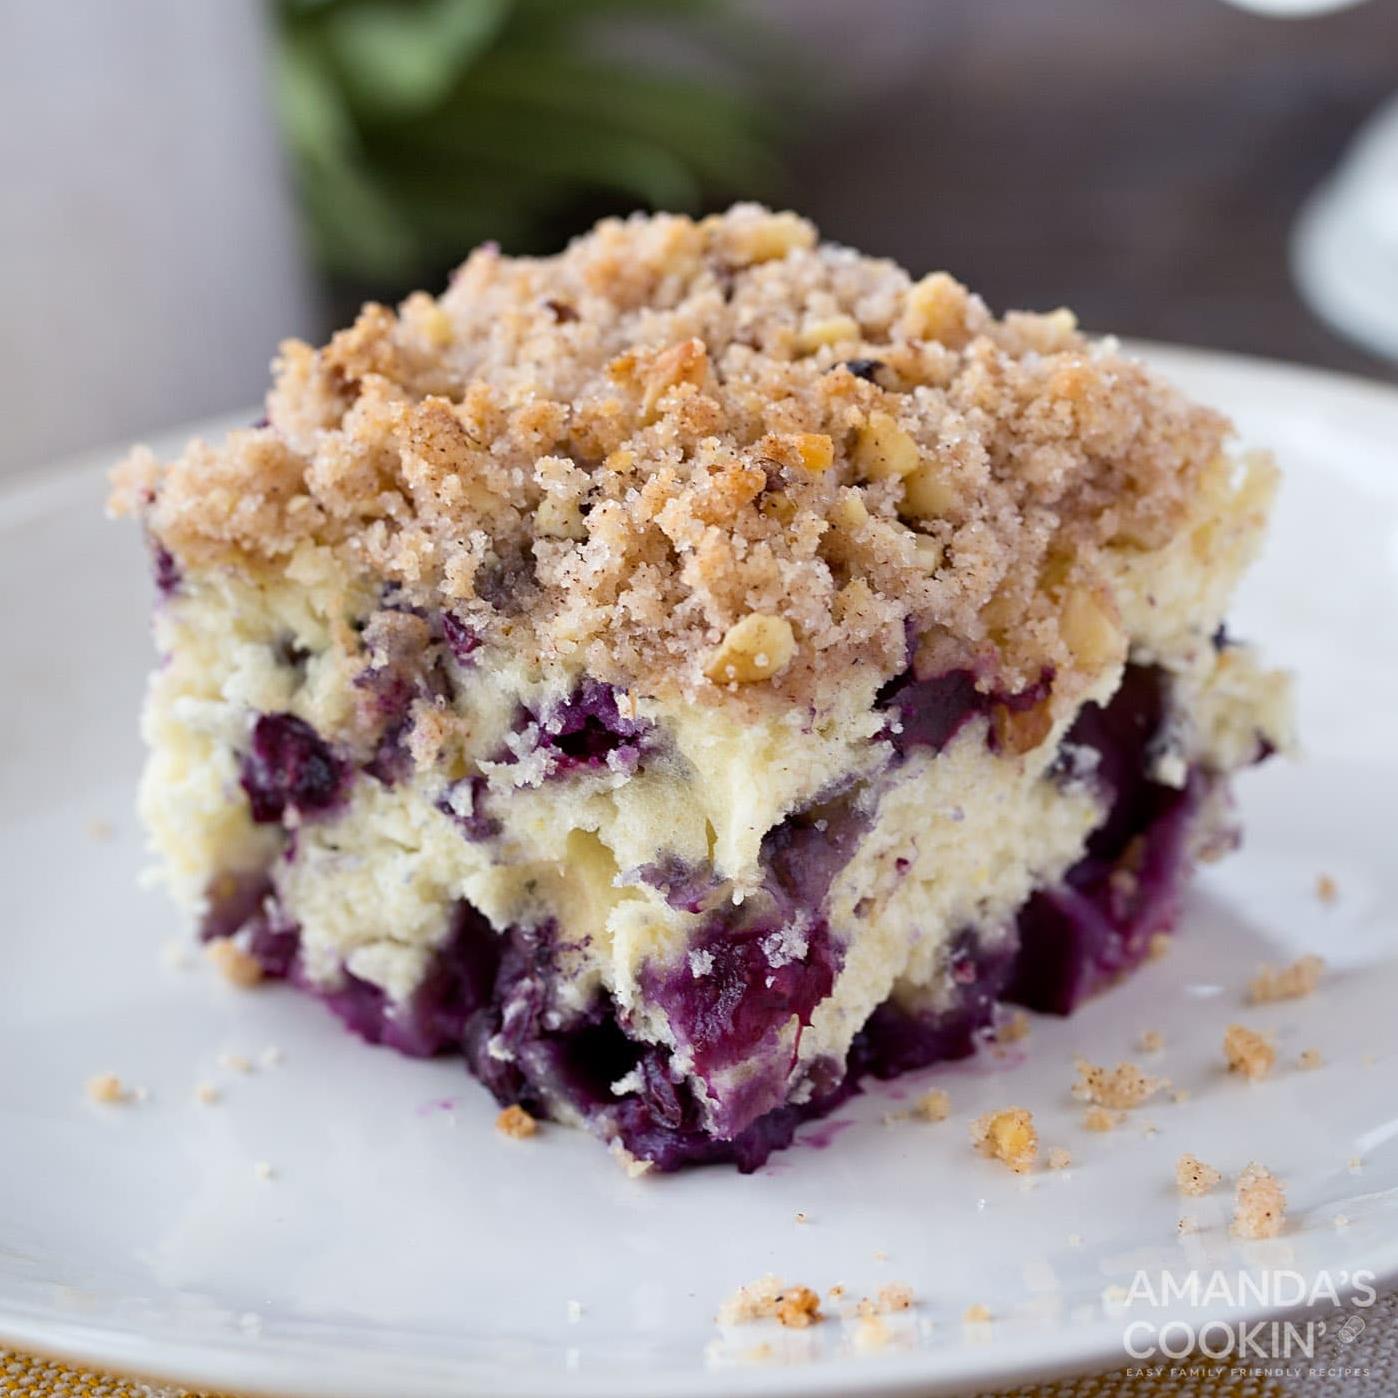  Start your day with a burst of flavor and color! Our Blueberry-Pineapple Coffee Cake is a delightful treat for your senses.